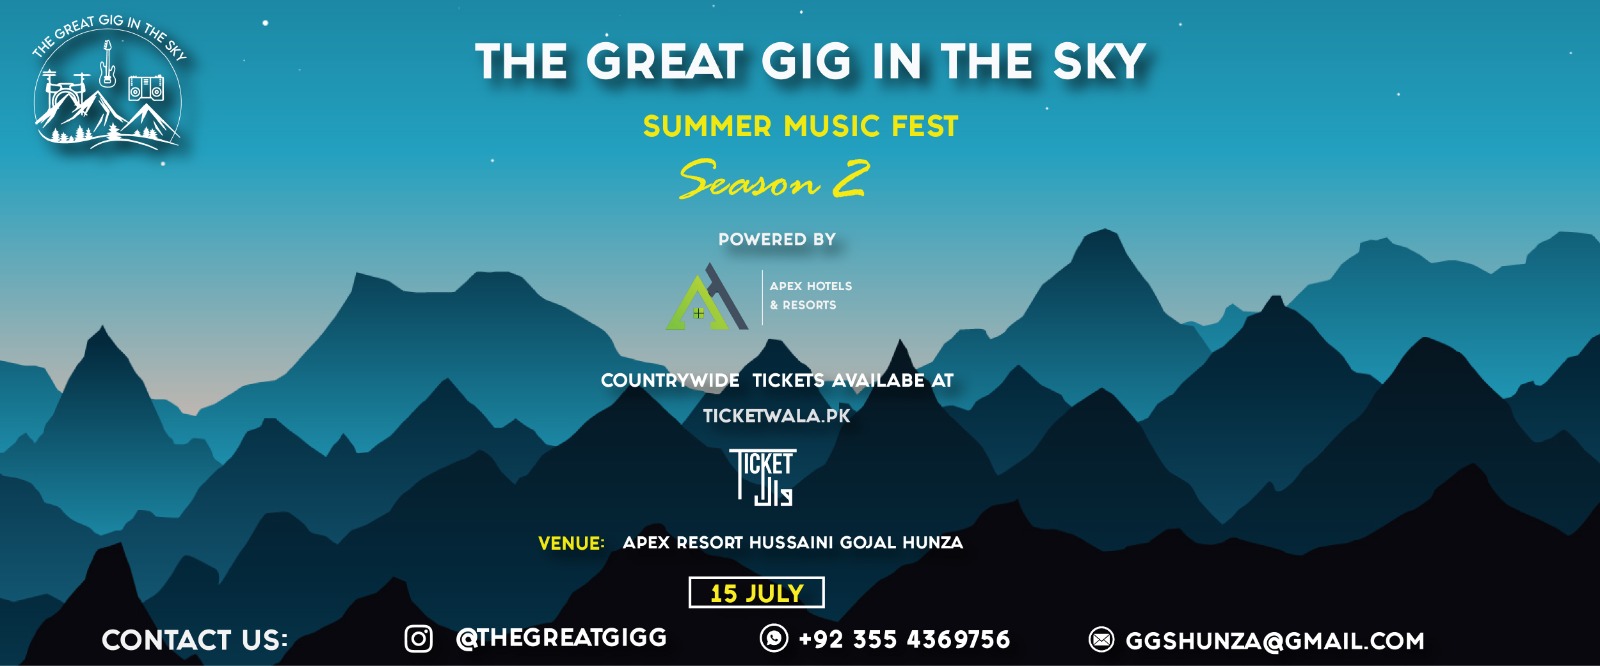 The Great Gig In The Sky Season 2 - Summer Festival